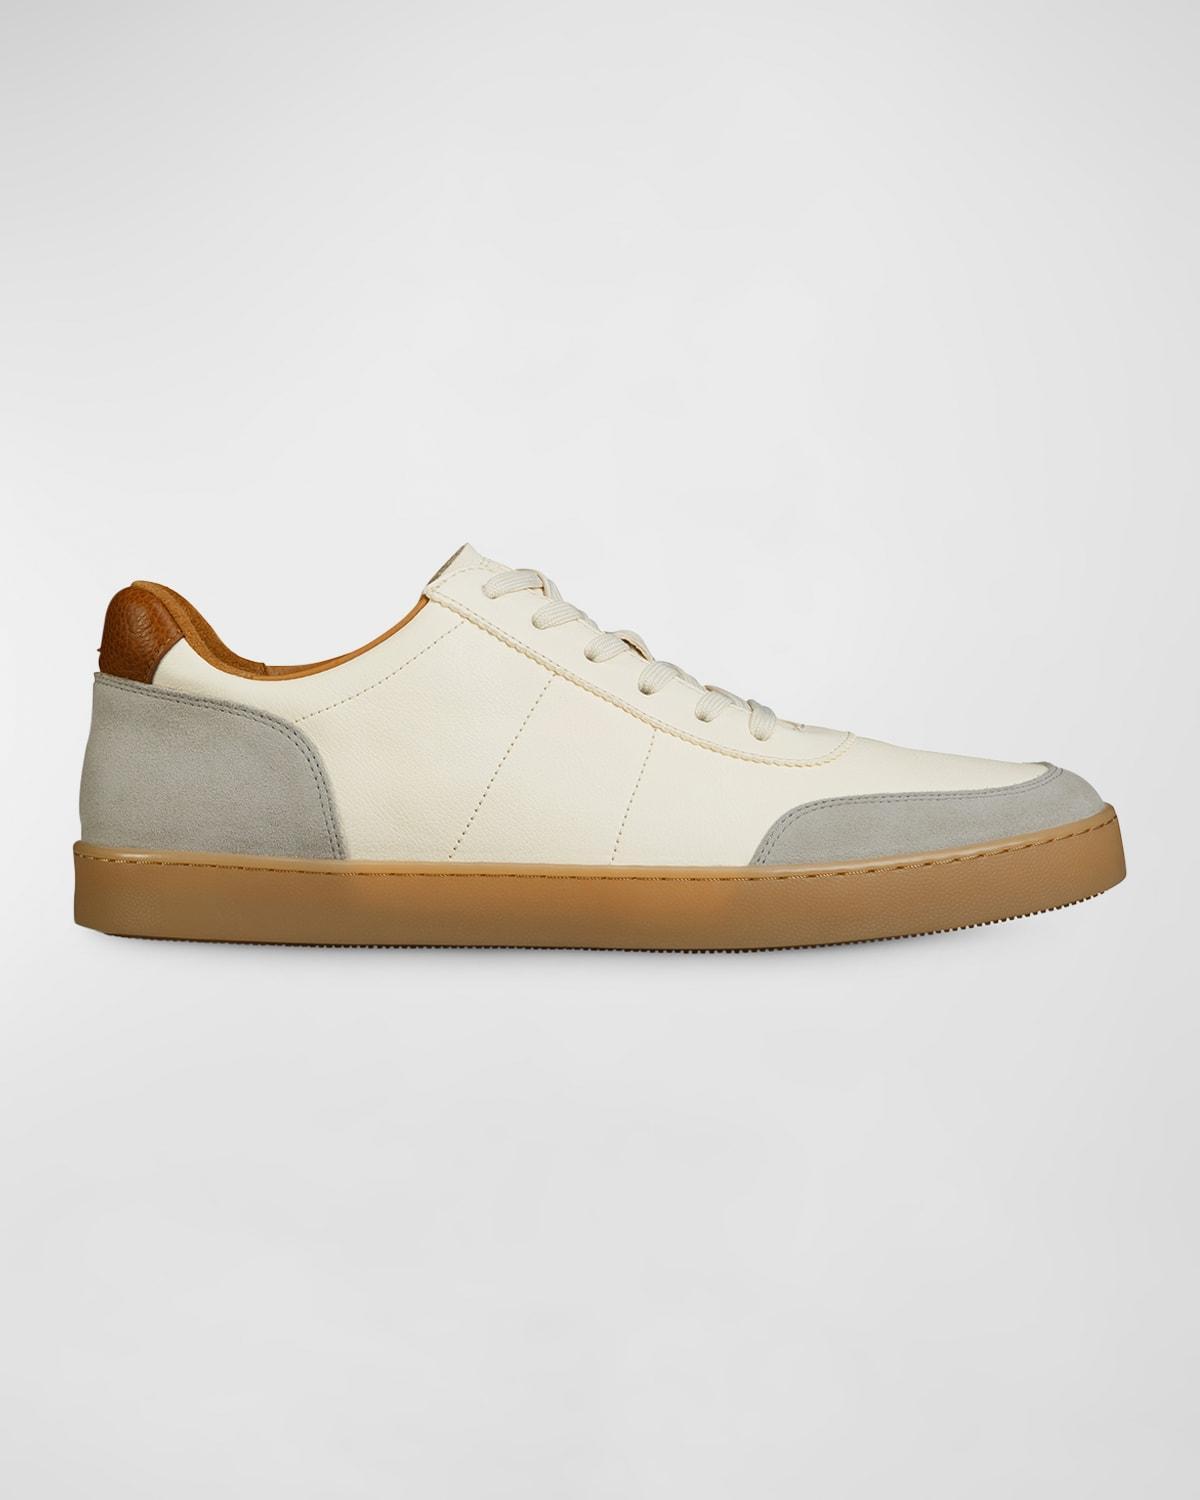 Mens Liam Leather Low-Top Sneakers Product Image